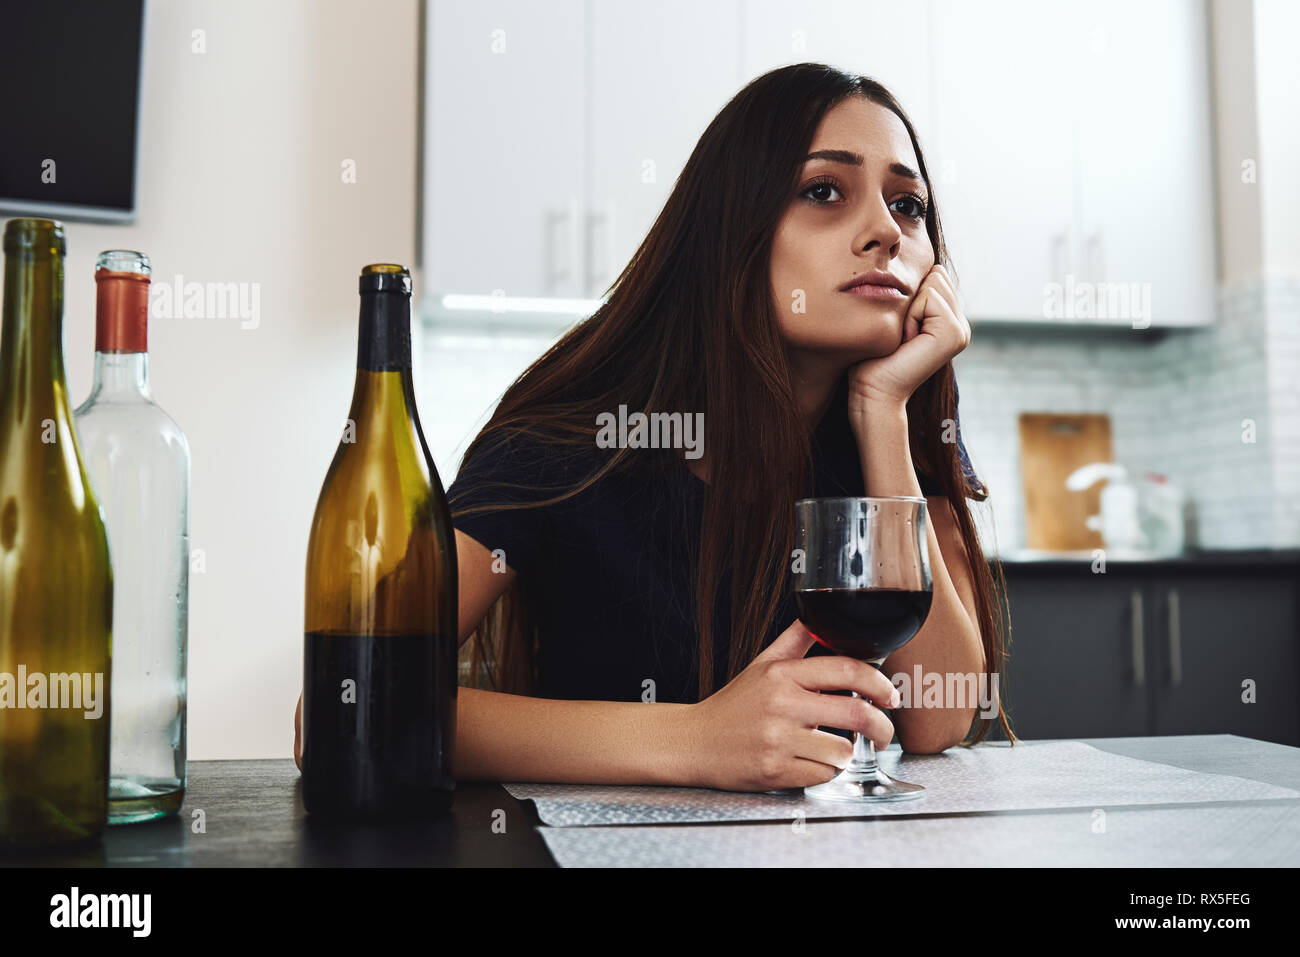 Dark-haired, sad and wasted alcoholic woman sitting at home, in the kitchen, drinking red wine, holding glass, completely drunk, looking depressed, lo Stock Photo